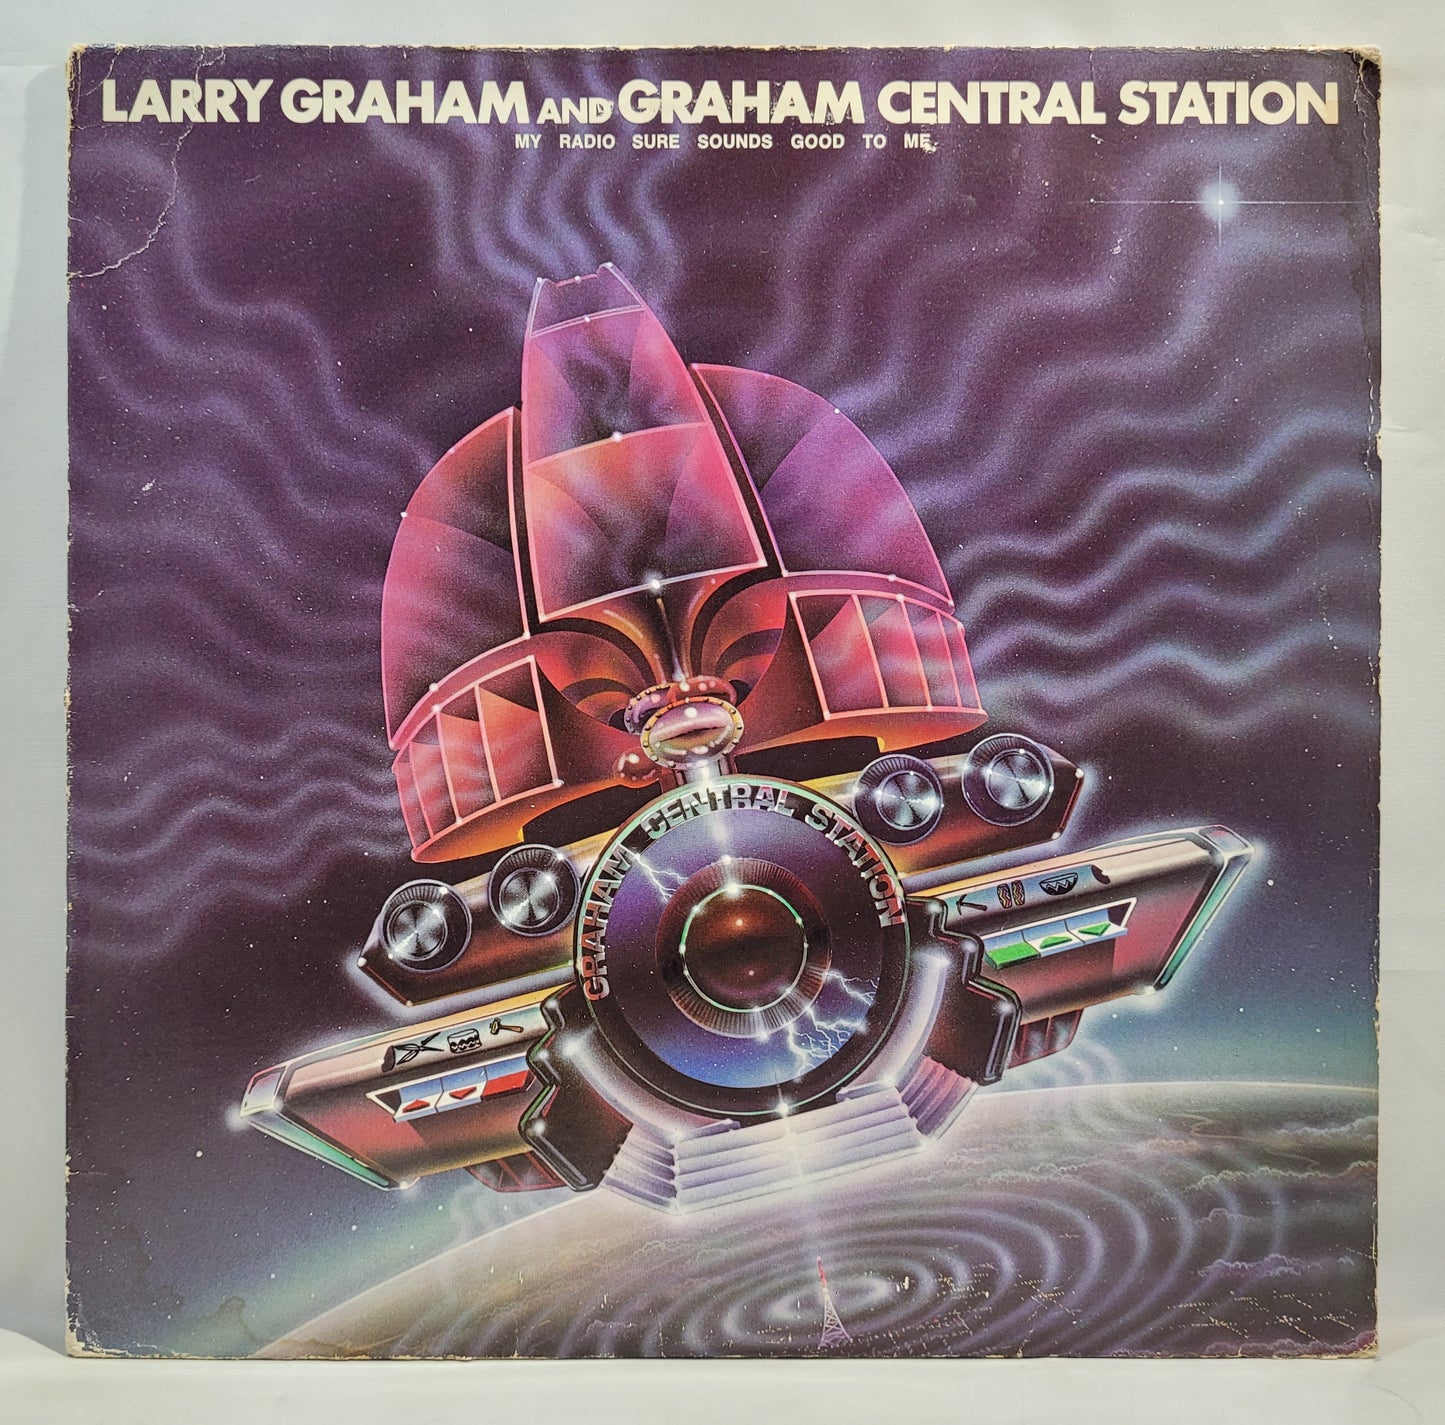 Larry Graham and Graham Central Station - My Radio Sure Sounds Good to Me [Vinyl Record LP]